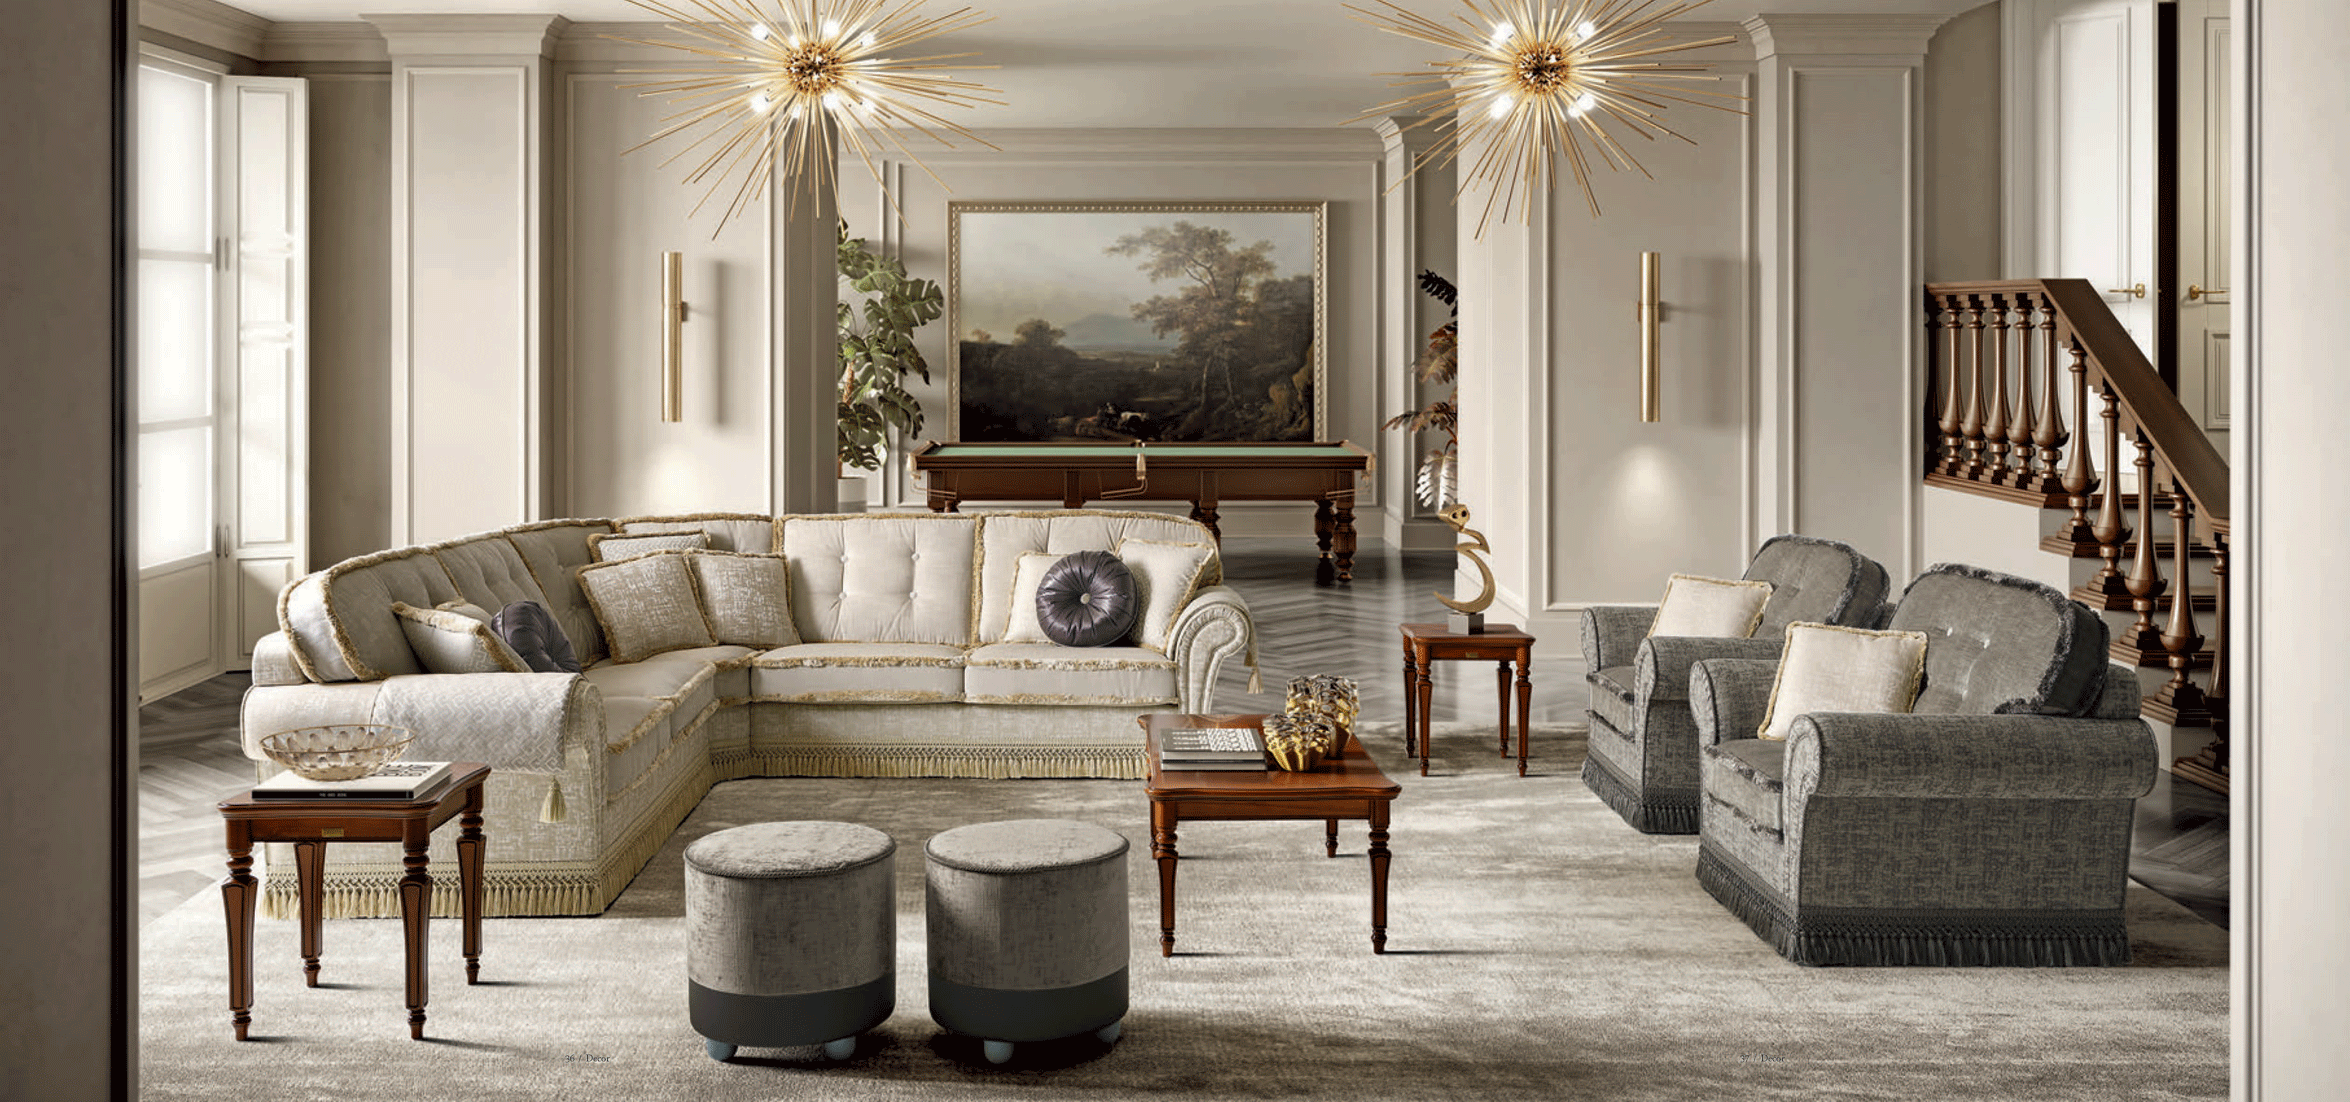 Brands Camel Modern Living Rooms, Italy Decor Day Living